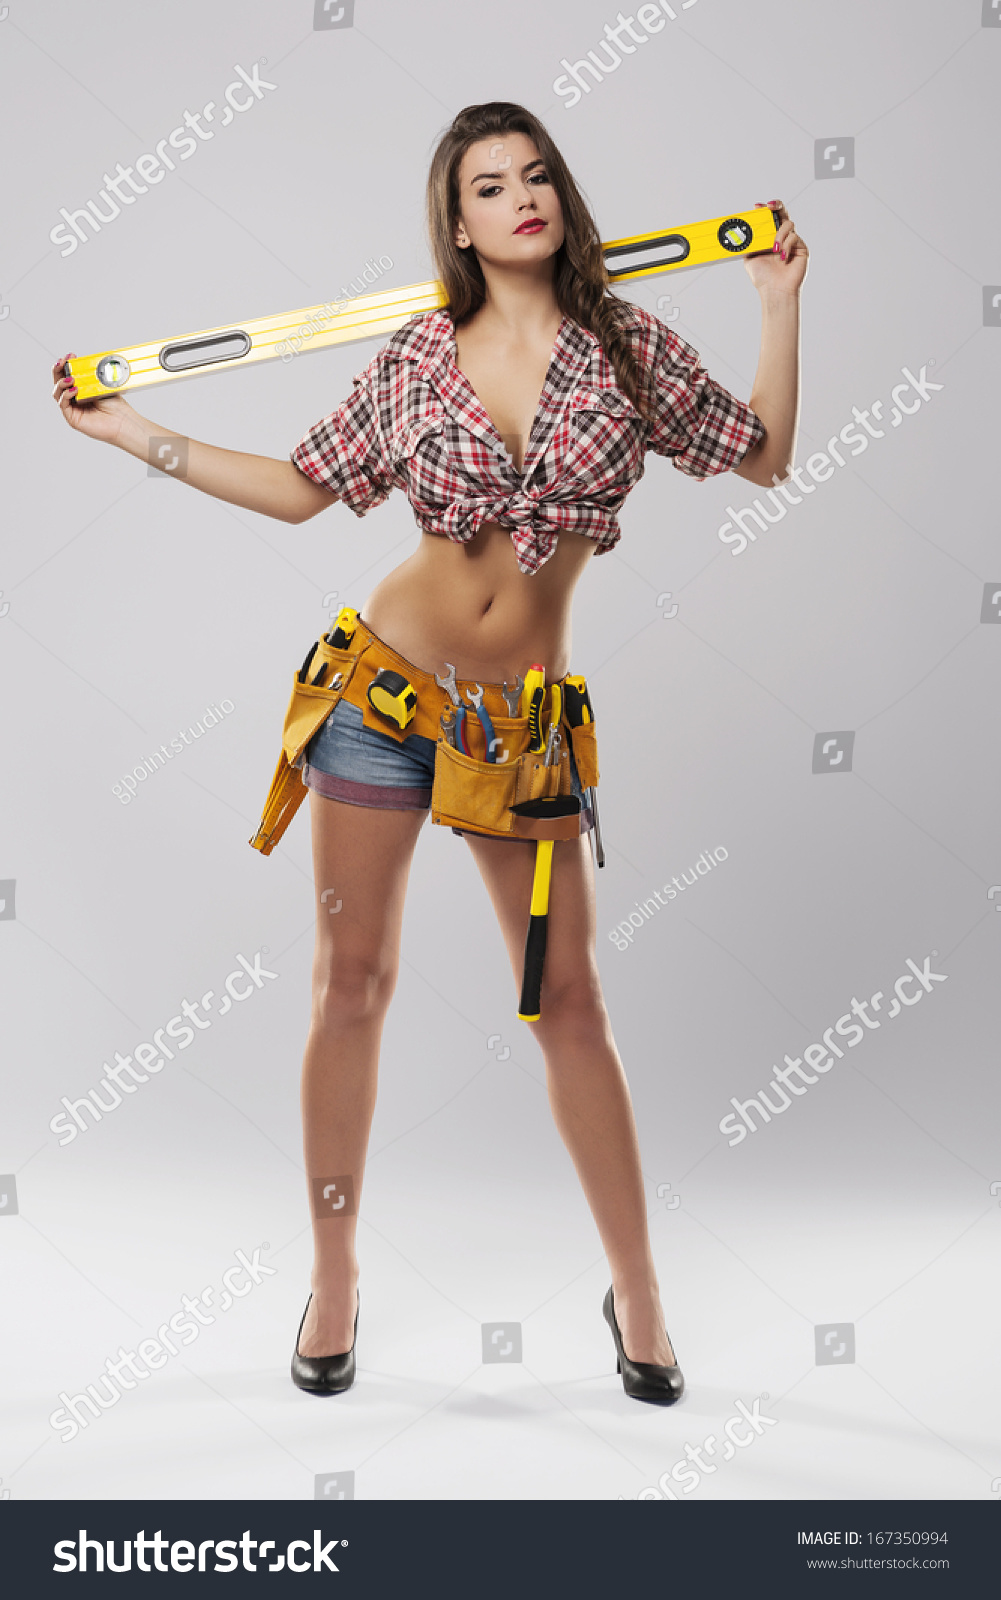 corina stefan recommends Sexy Female Construction Worker